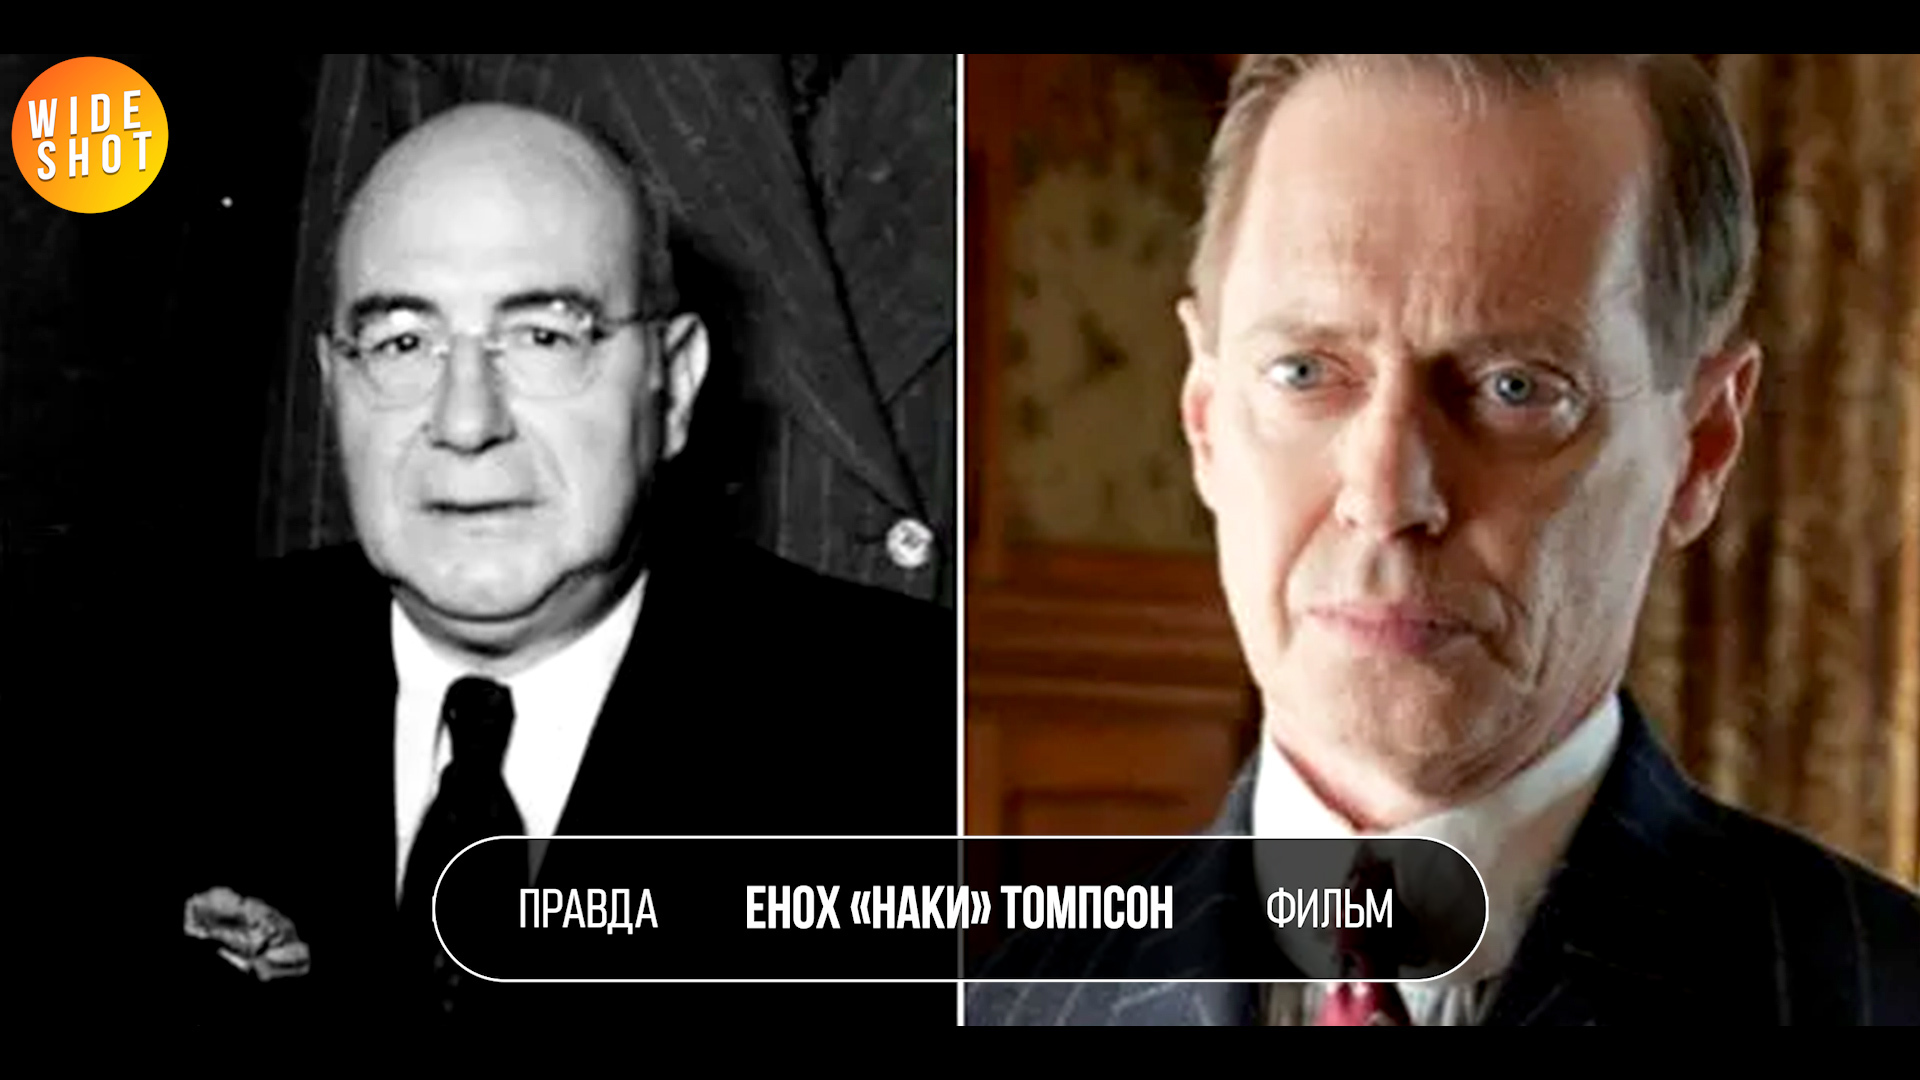 UNDERGROUND EMPIRE - HOW DO THE CHARACTERS OF THE SERIES LOOK IN REAL LIFE? - Video review, Hollywood, Movies, Actors and actresses, Celebrities, Serials, Steve Buscemi, Underground Empire, Mafia, Based on true events, Foreign serials, What to see, I advise you to look, Video, Youtube, Longpost